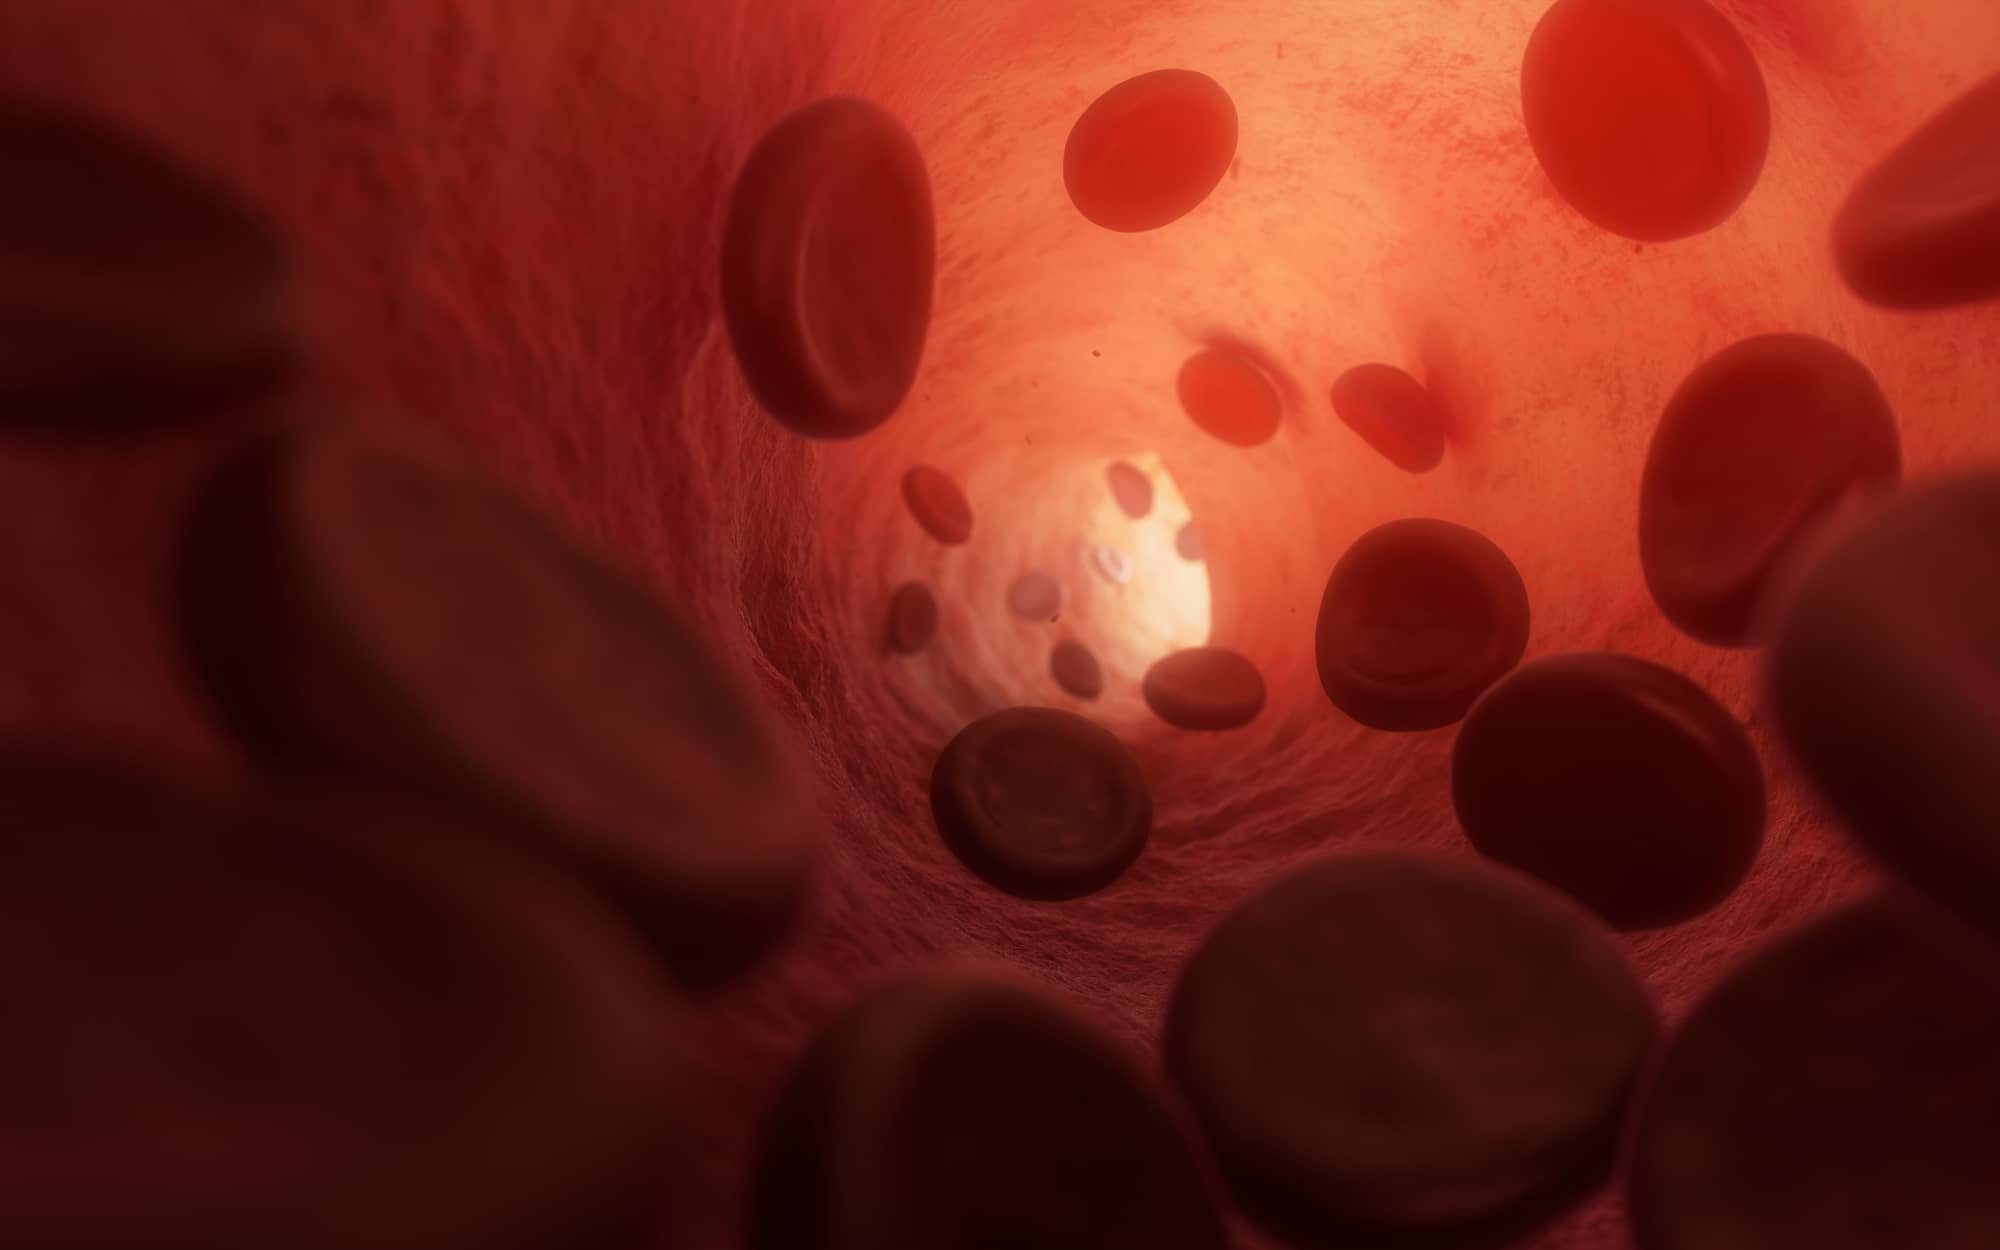 Flow of Red Blood Cells (RBC) inside a Vein stock photo